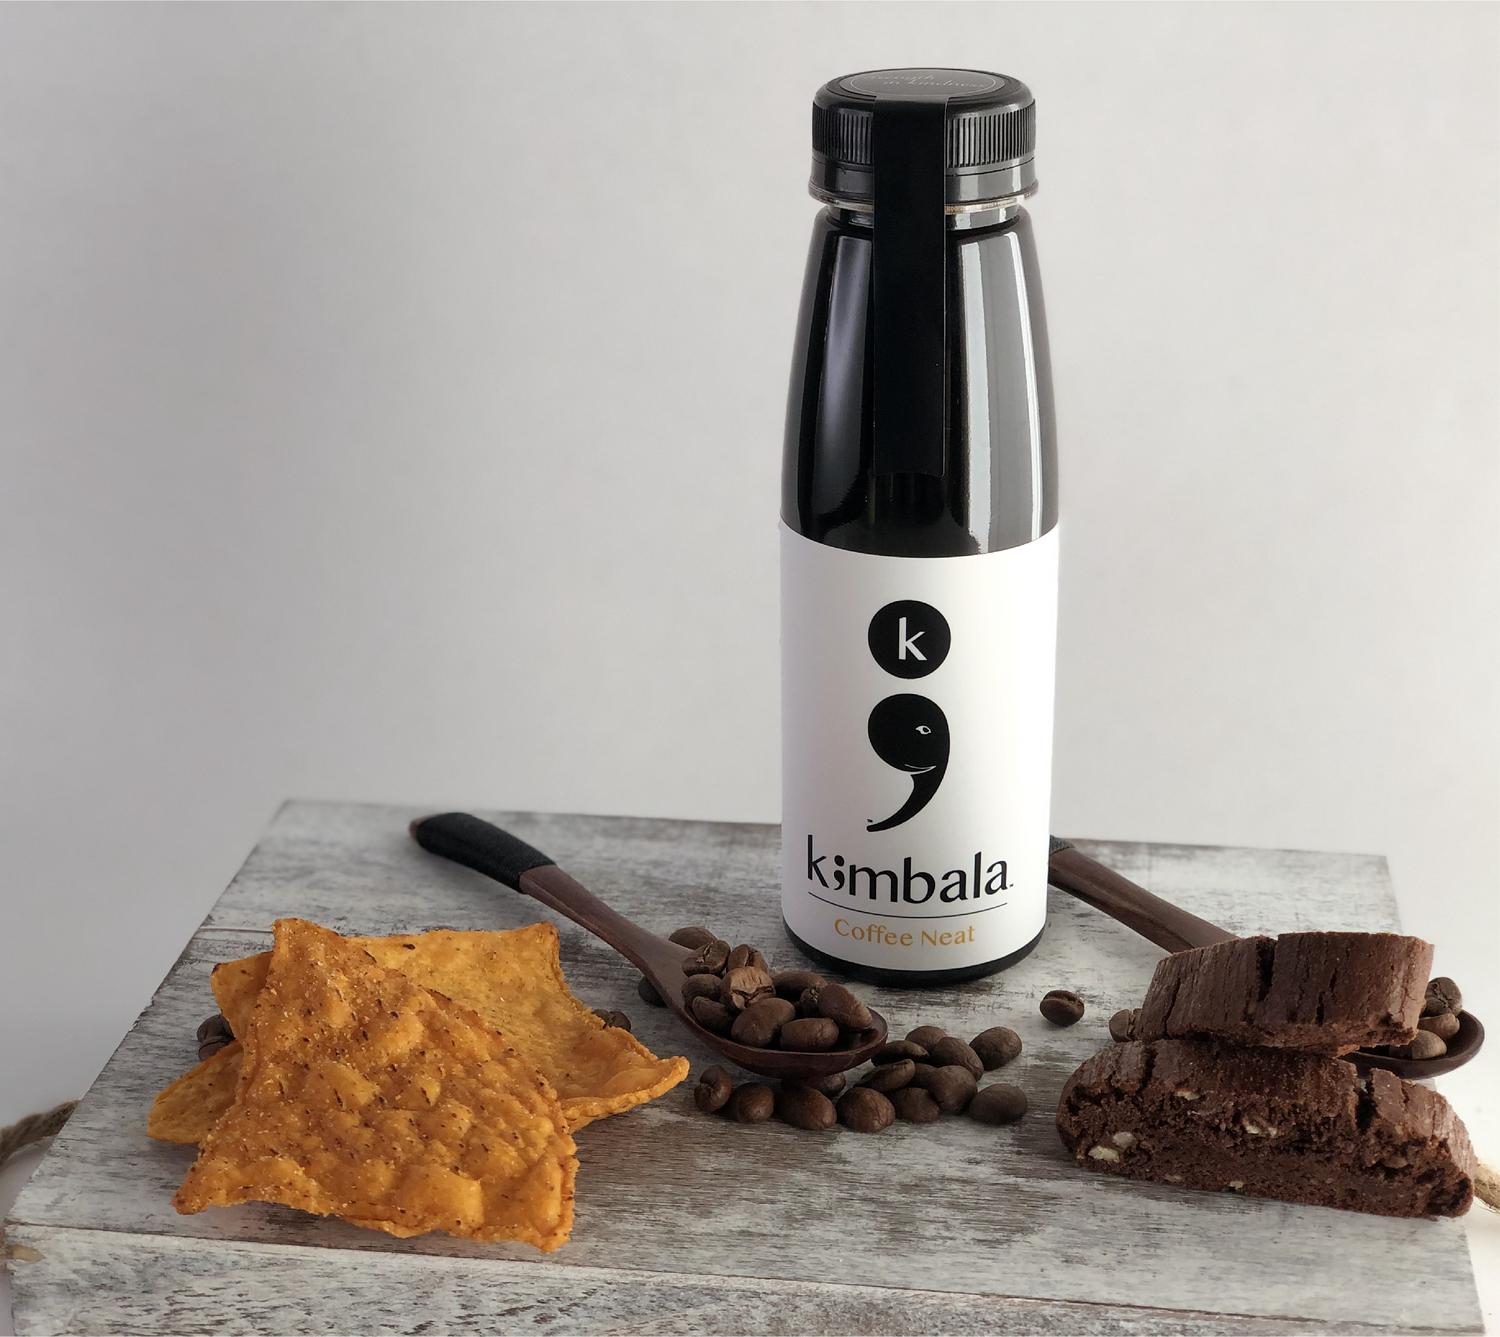 Kimbala Coffee neat, 10.2oz bottle of clean caffeine black coffee, surrounded by coffee beans on a small wooden spoon, chocolate biscotti cookies and sweet potato chips.